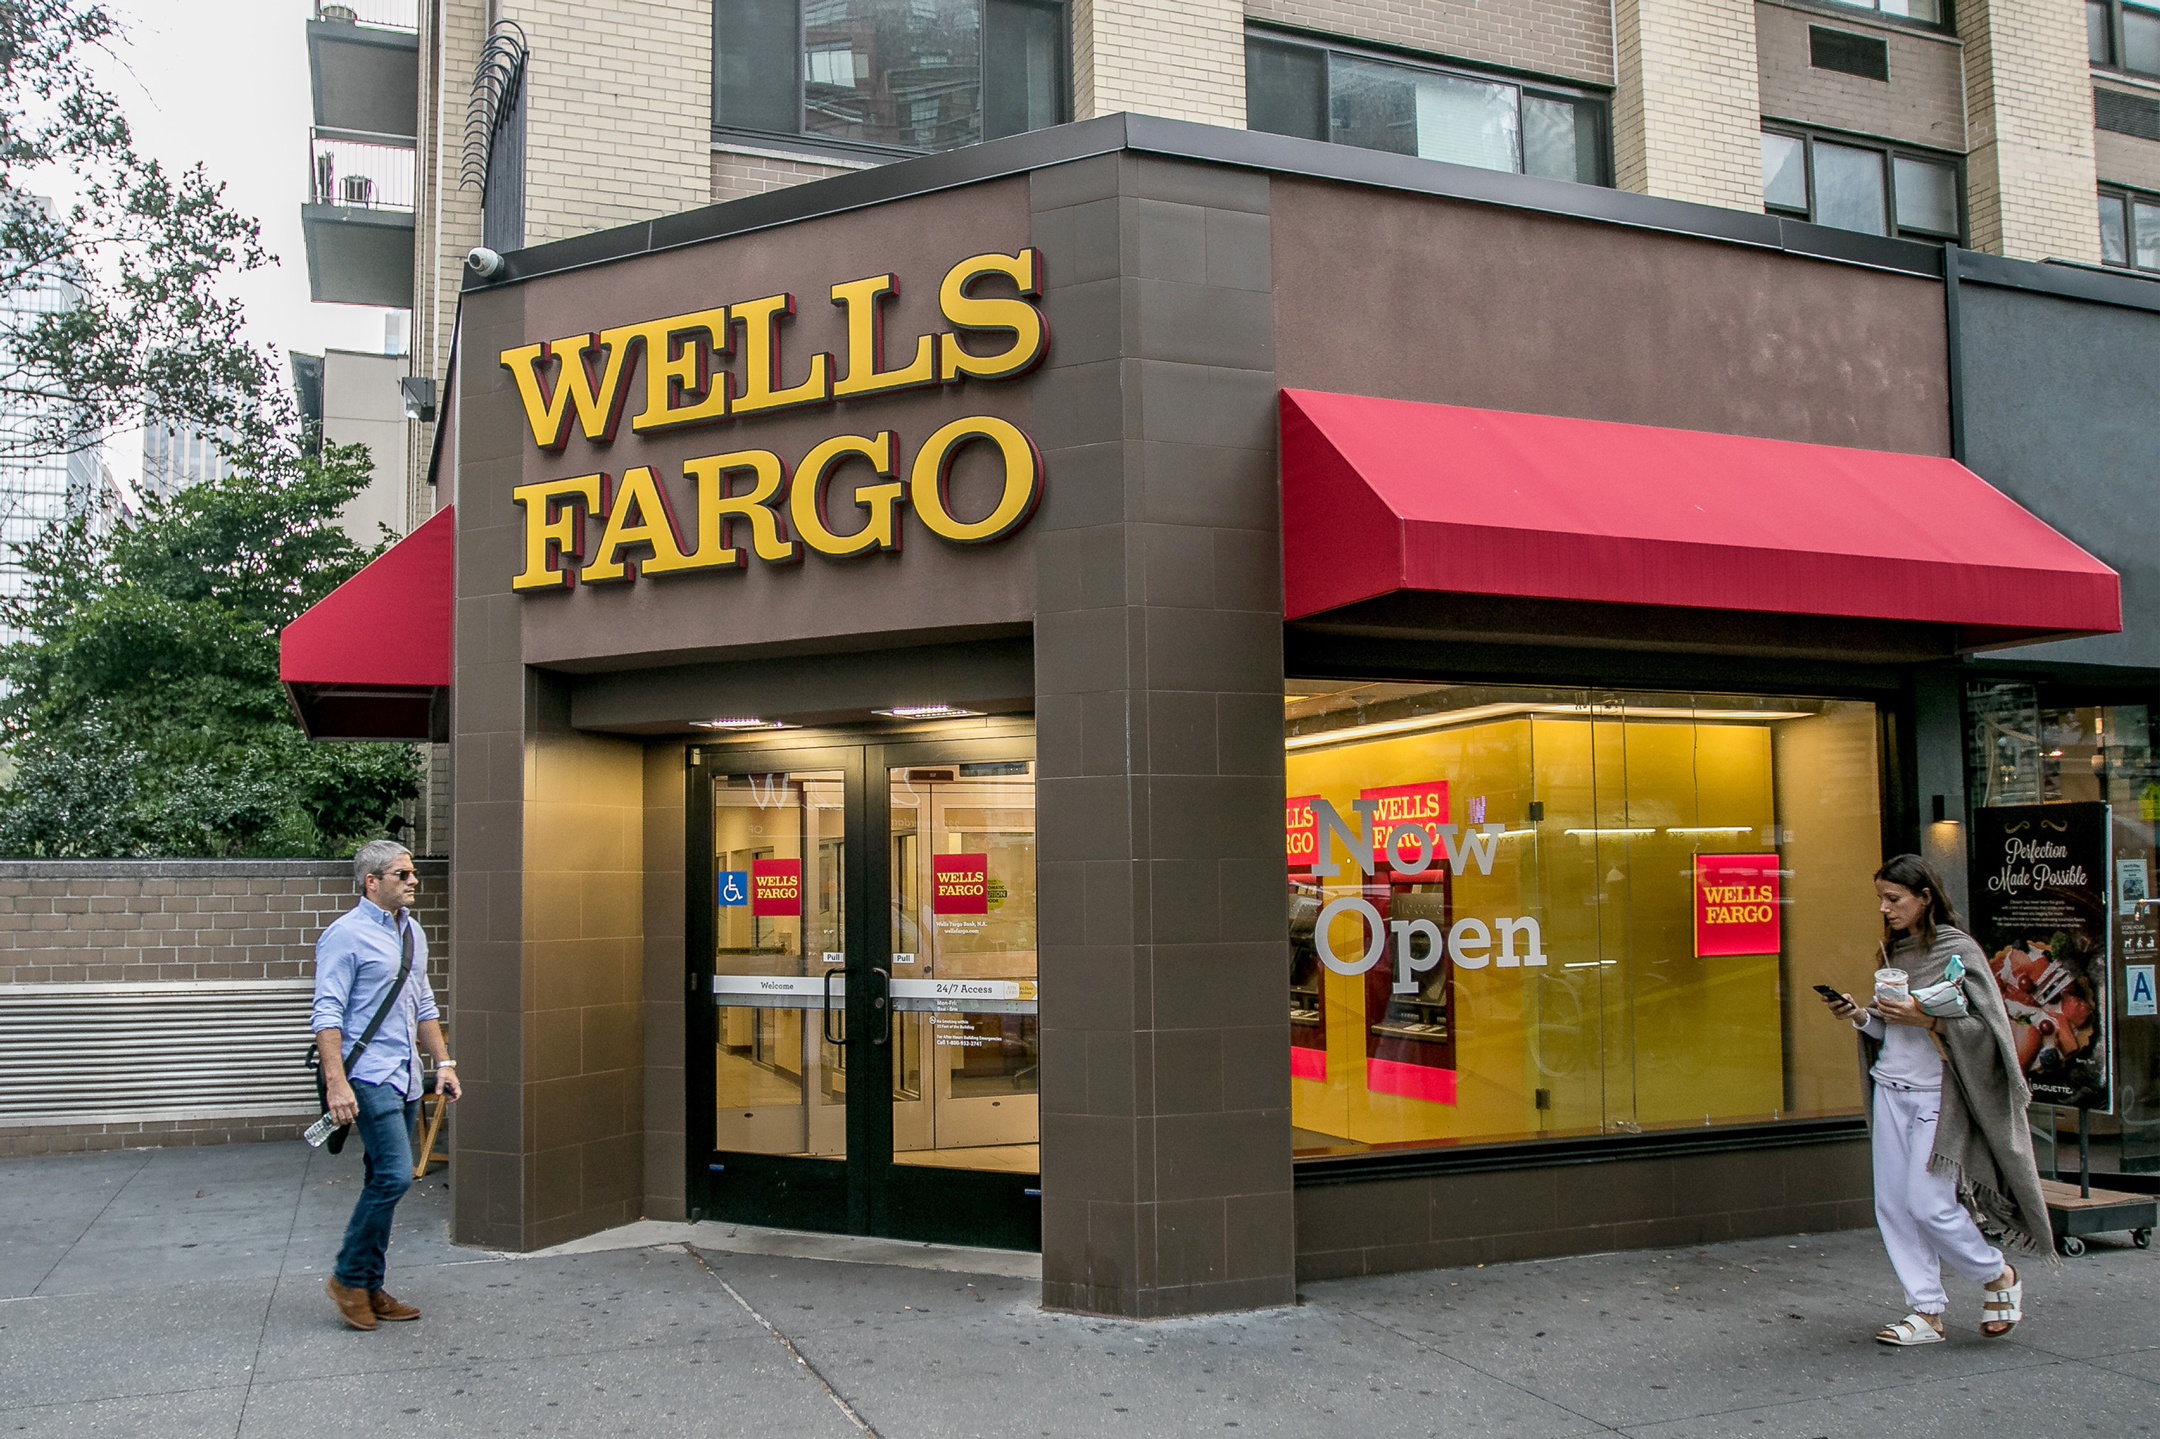 How to Stop Wells Fargo from Deducting Funds from your Account